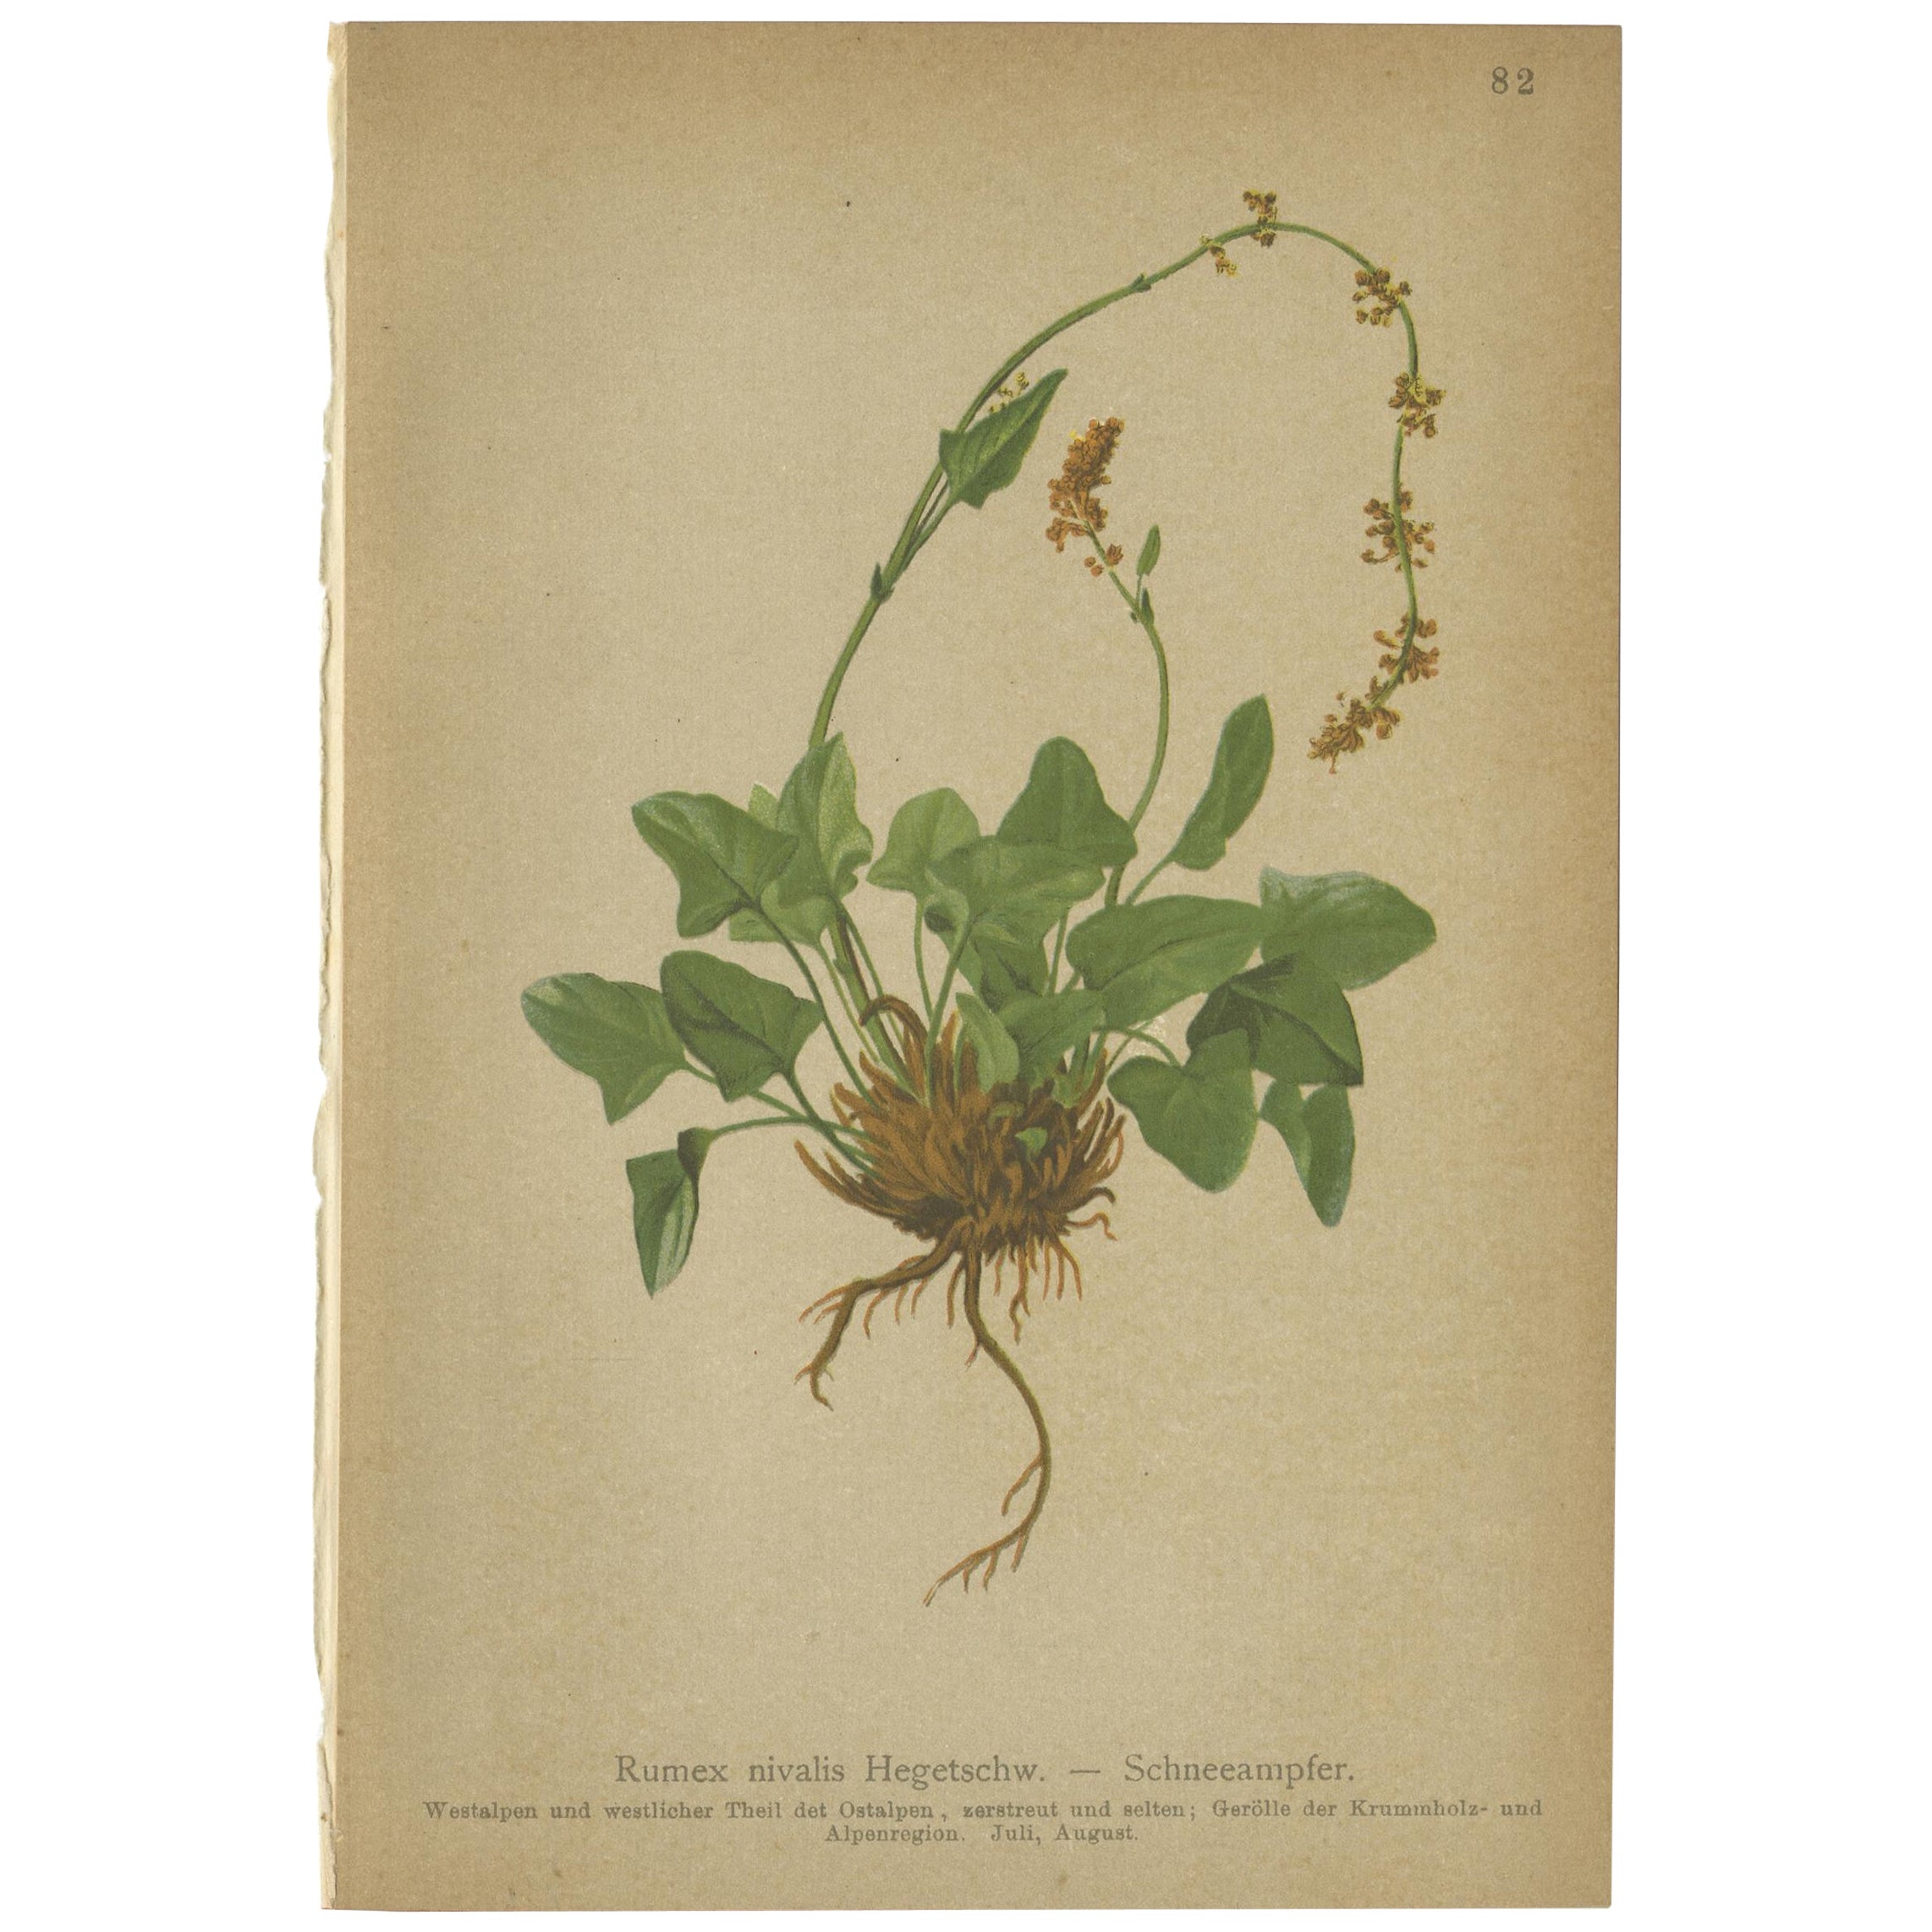 Antique Botany Print of The Rumex Nivalis by Palla, 1897